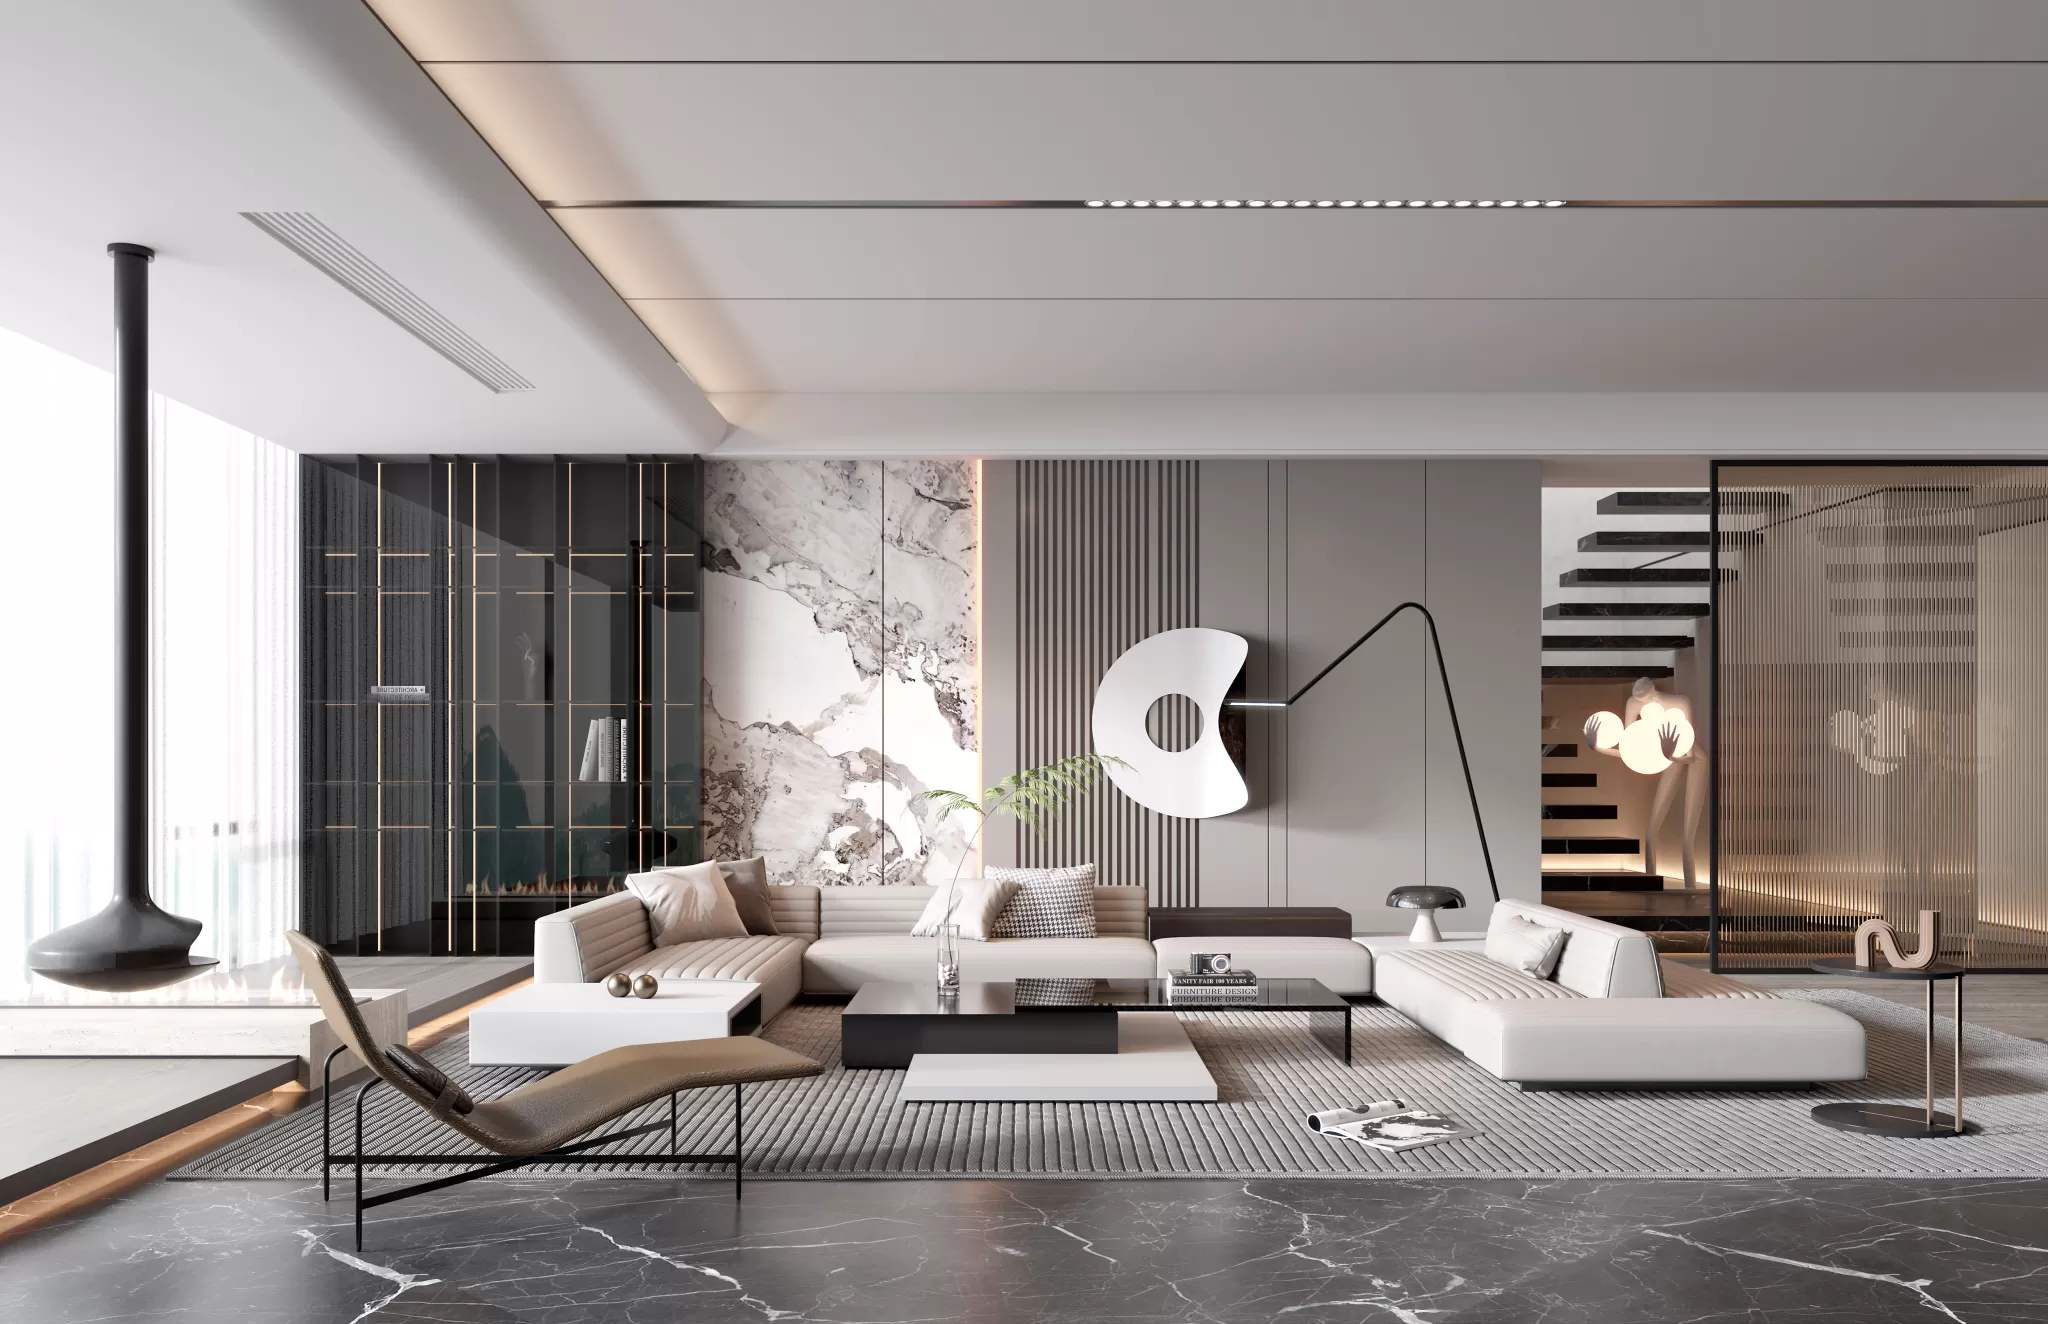 HOUSE SPACE 3D SCENES – LIVING ROOM – 0079